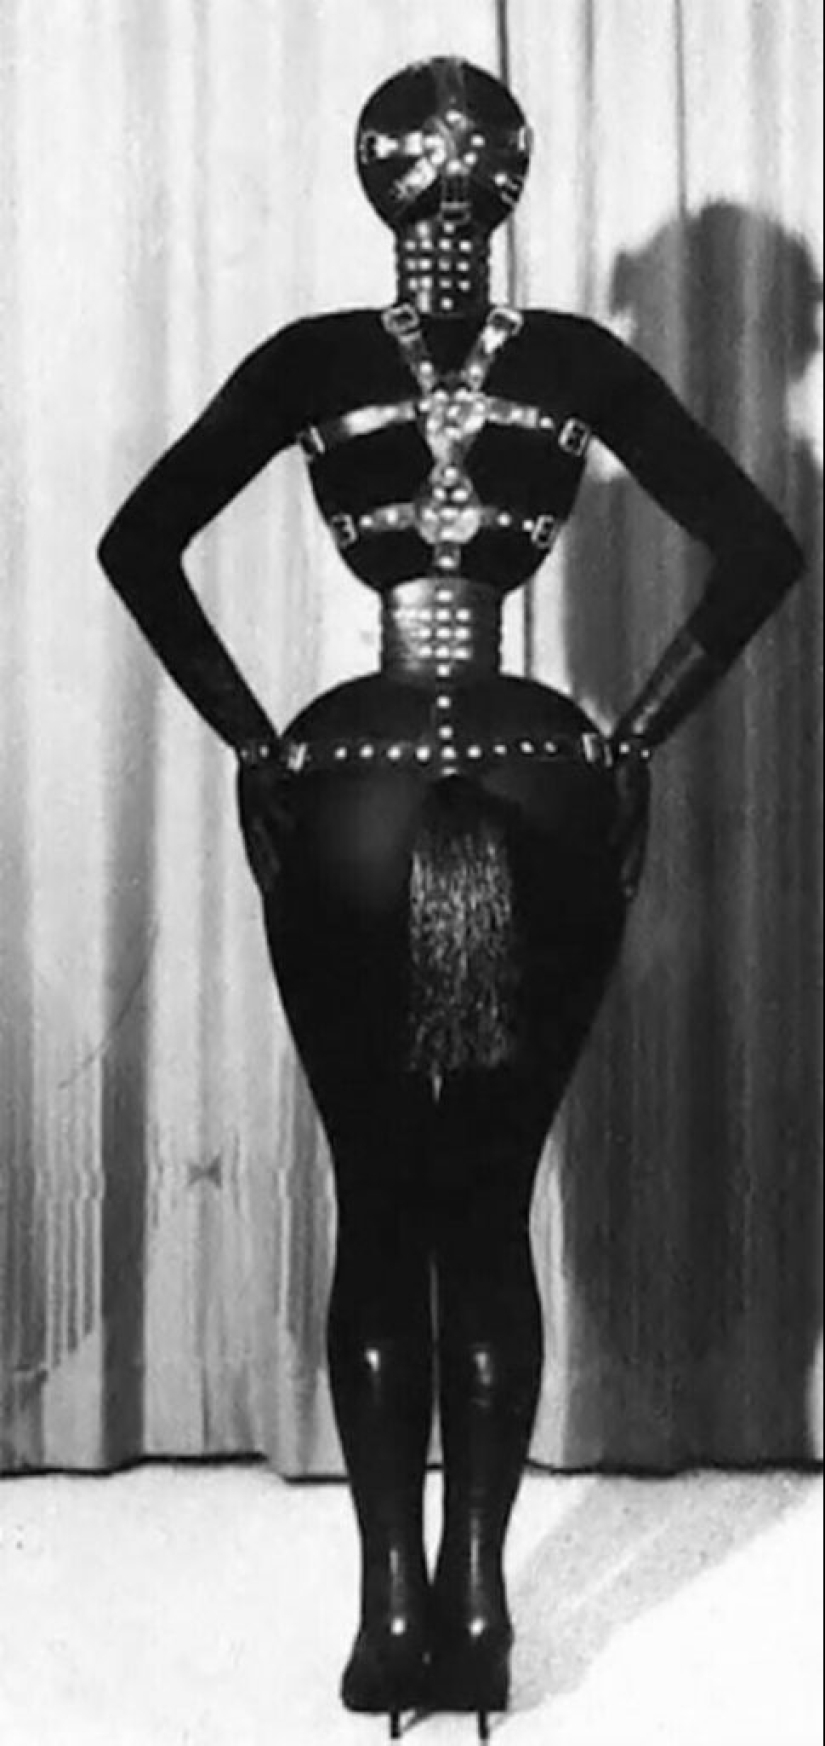 Cora Corsette is a fetish model from the 70s with a phenomenally narrow waist.